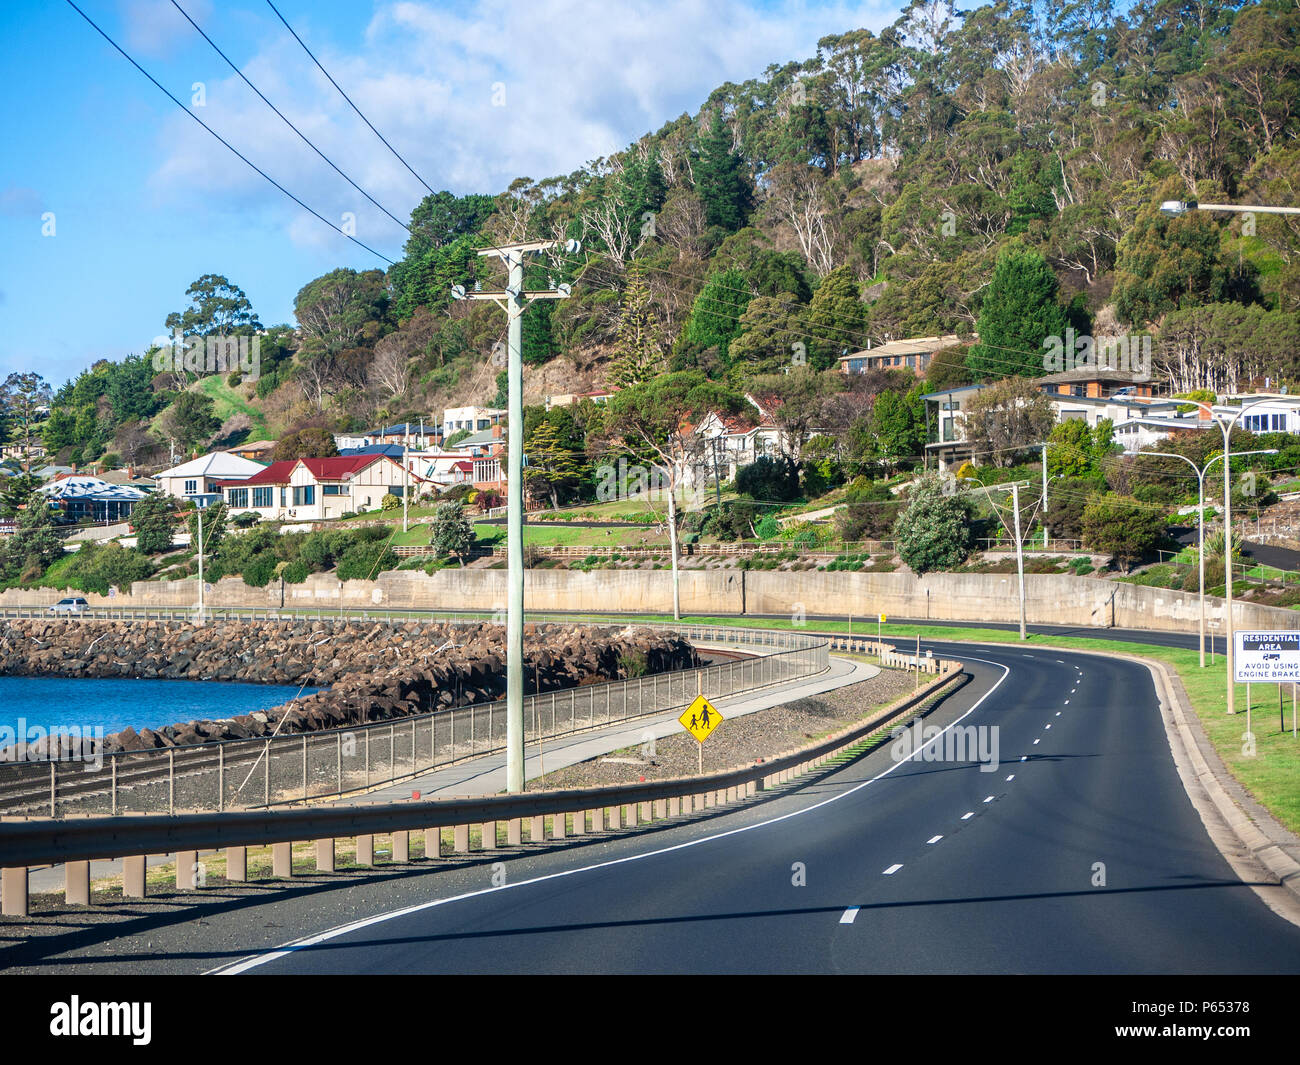 Asphalt road on coastline in Burnie with residential houses in distance. Burnie is a port city on the north-west coast of Tasmania, Australia. Stock Photo